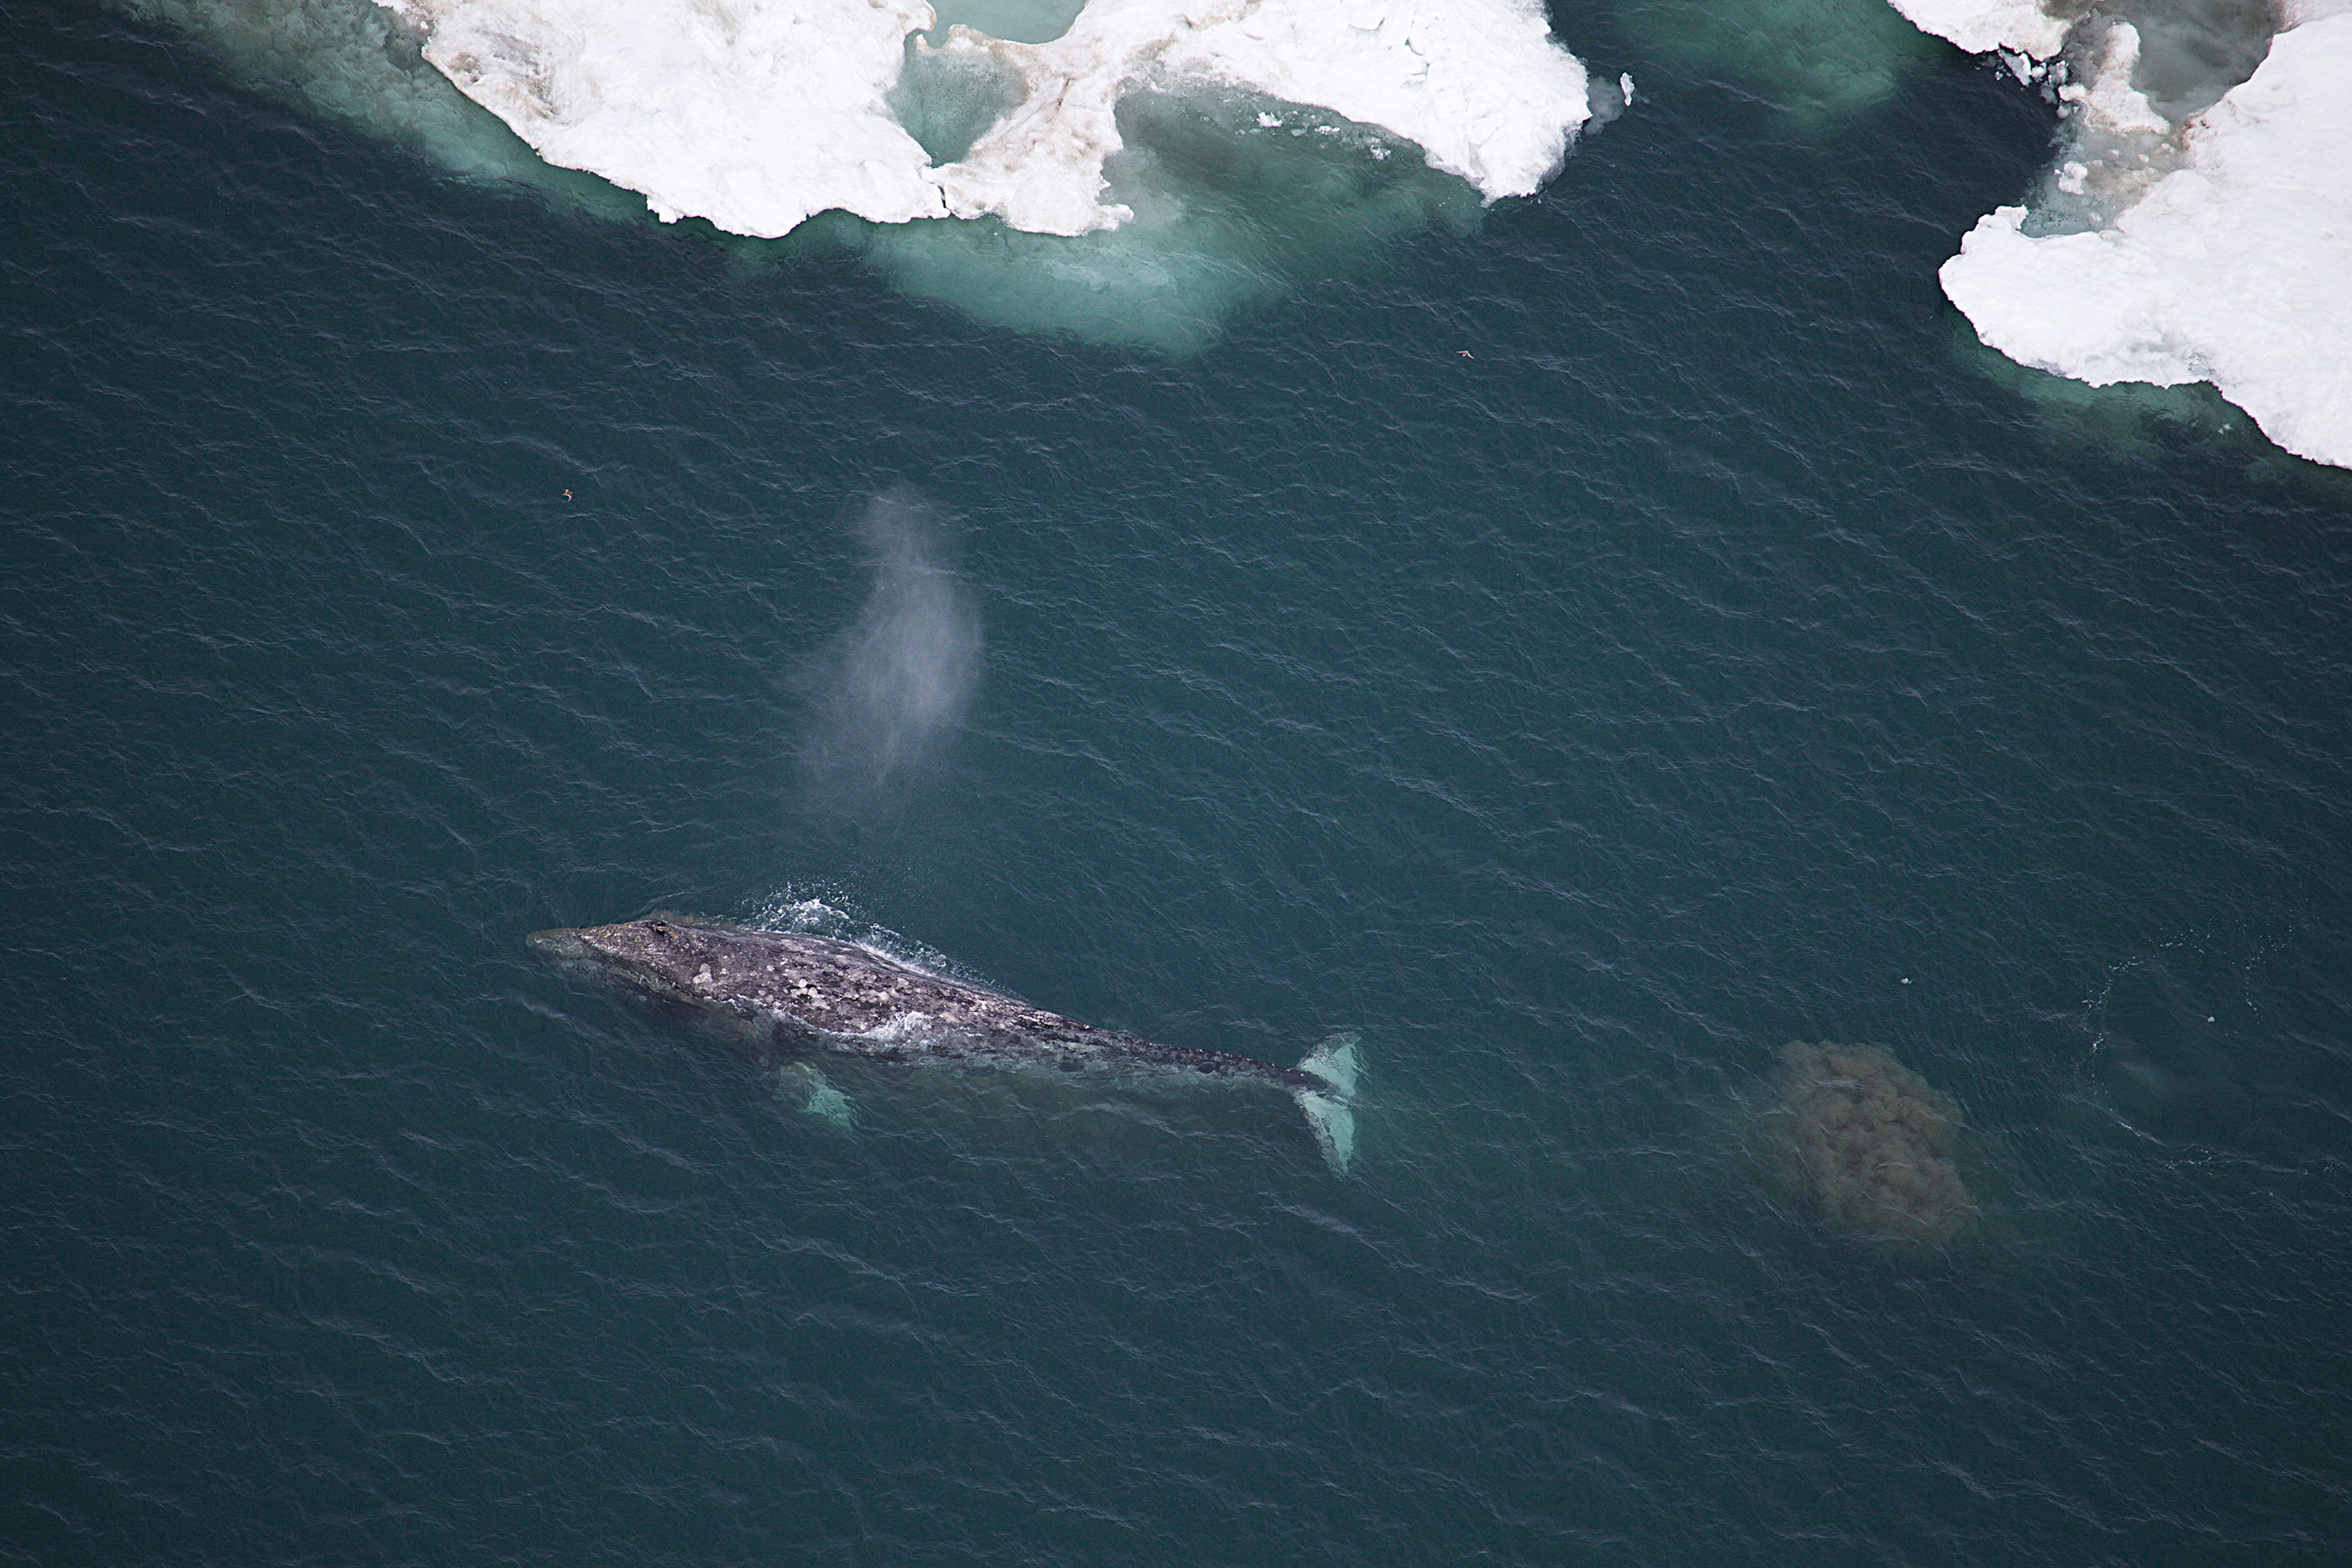 A gray whale swims in the Arctic's Chukchi Sea between Utqiagvik and Point Franklin on July 19, 2014. This is an area where gray whales regularly were seen feeding each year, less so in recent years, according to federal scientists.